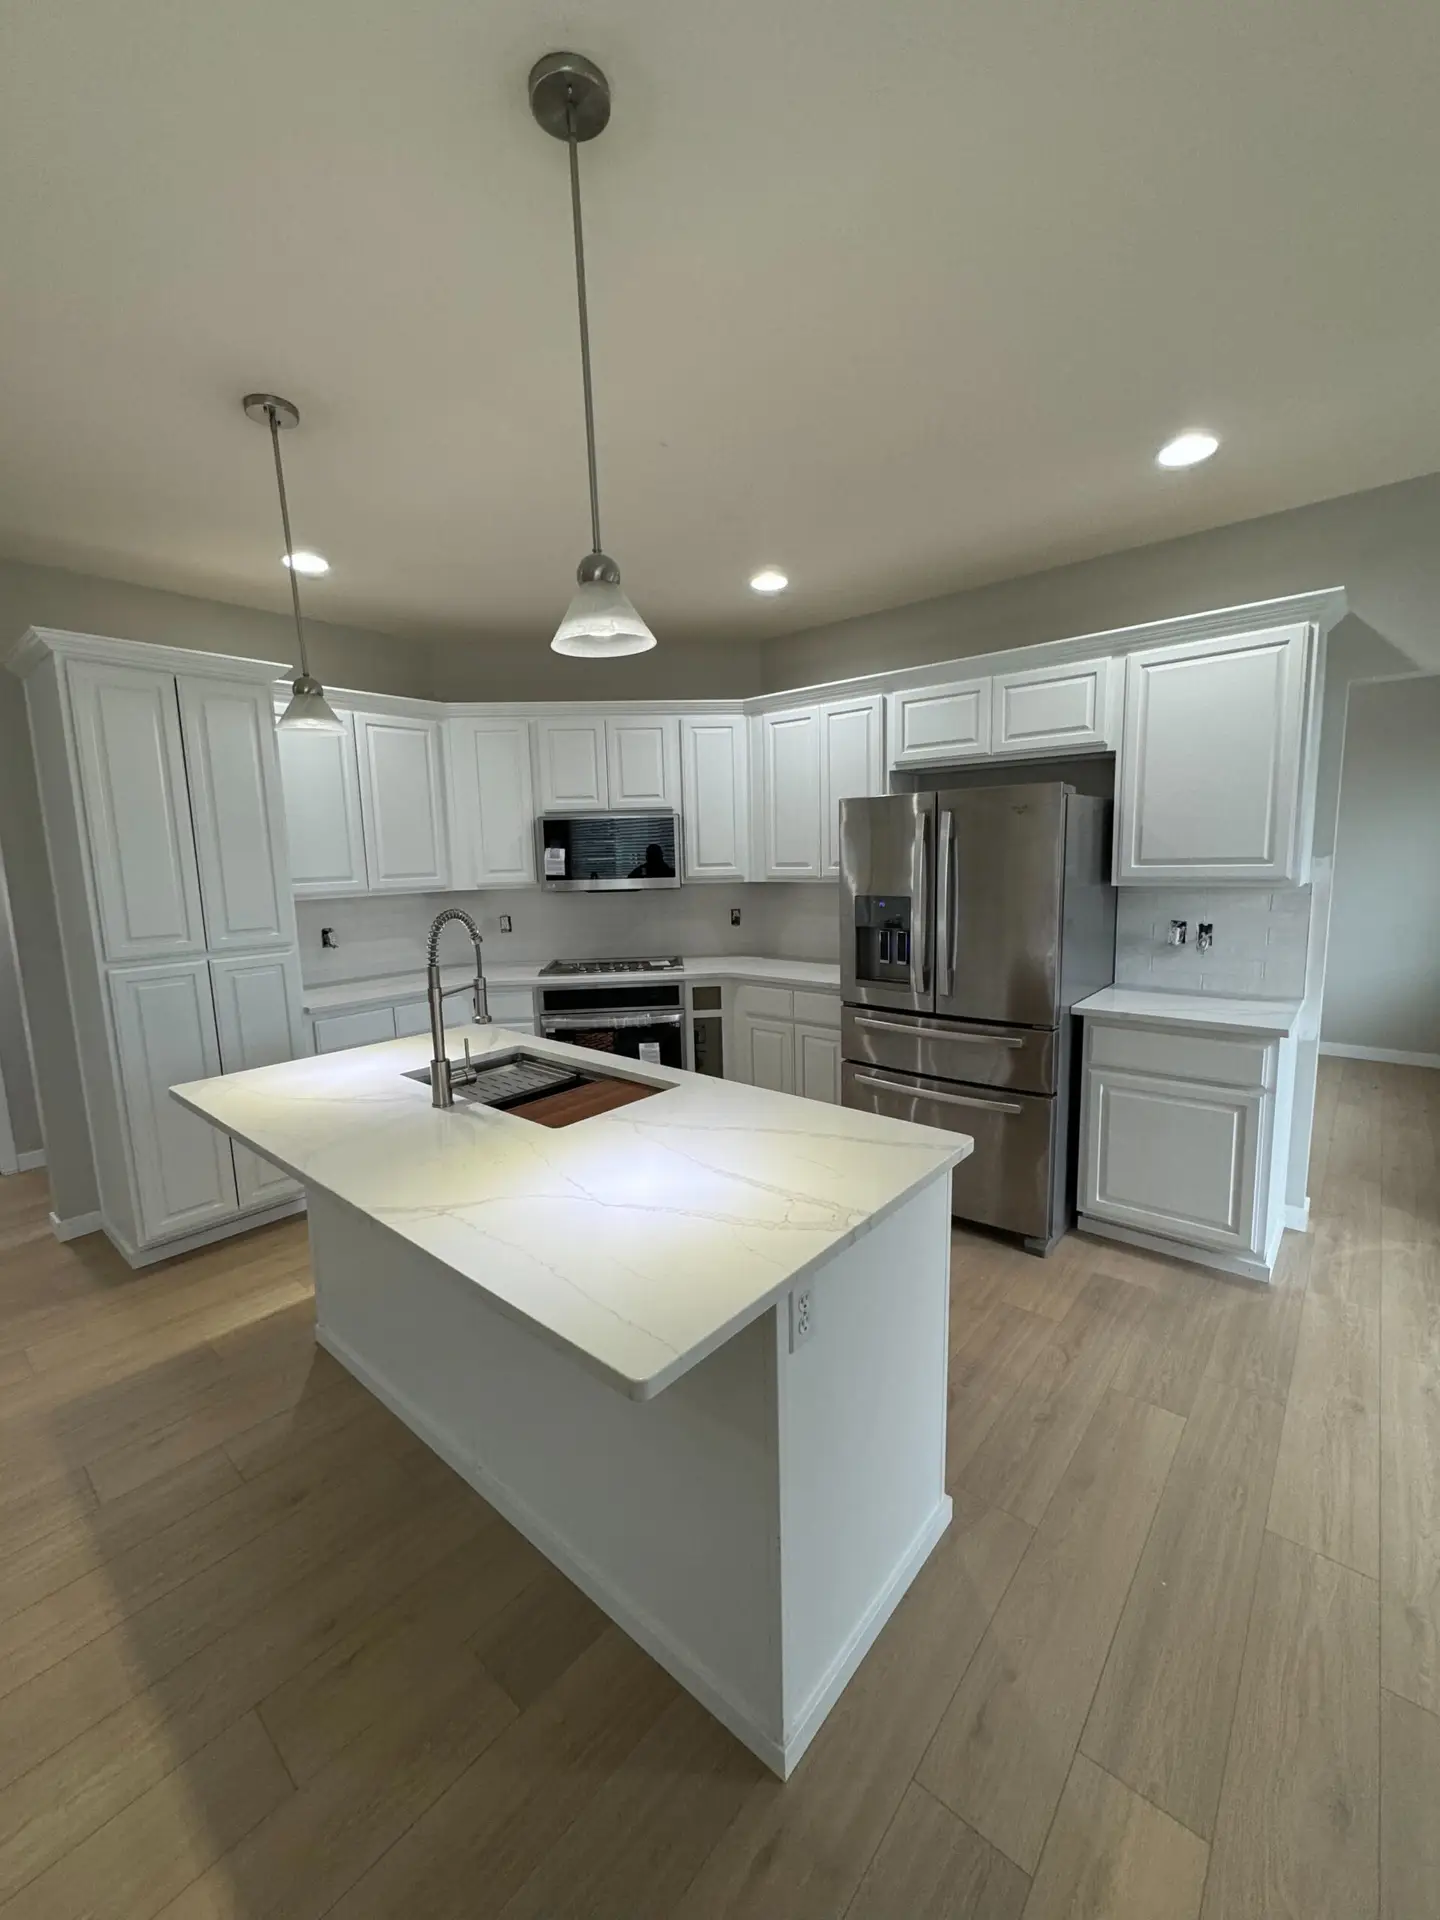 Modern kitchen interior with white cabinetry, stainless steel appliances, an island with a sink, under-cabinet lights, and hanging pendant lights, set against a neutral wall and light wood flooring.